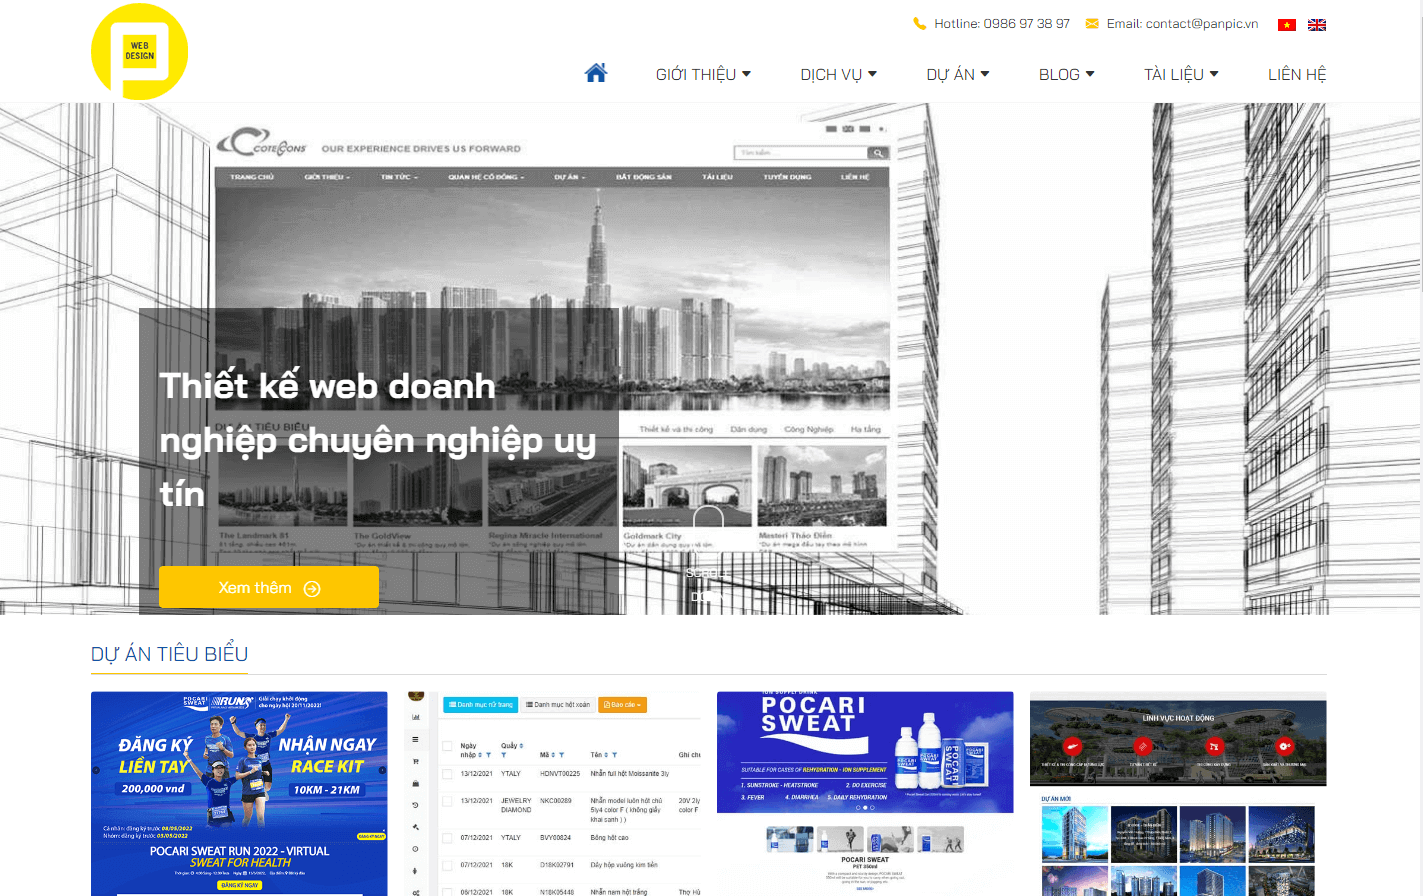 Tuyển web designer thiết kế giao diện layout cho website